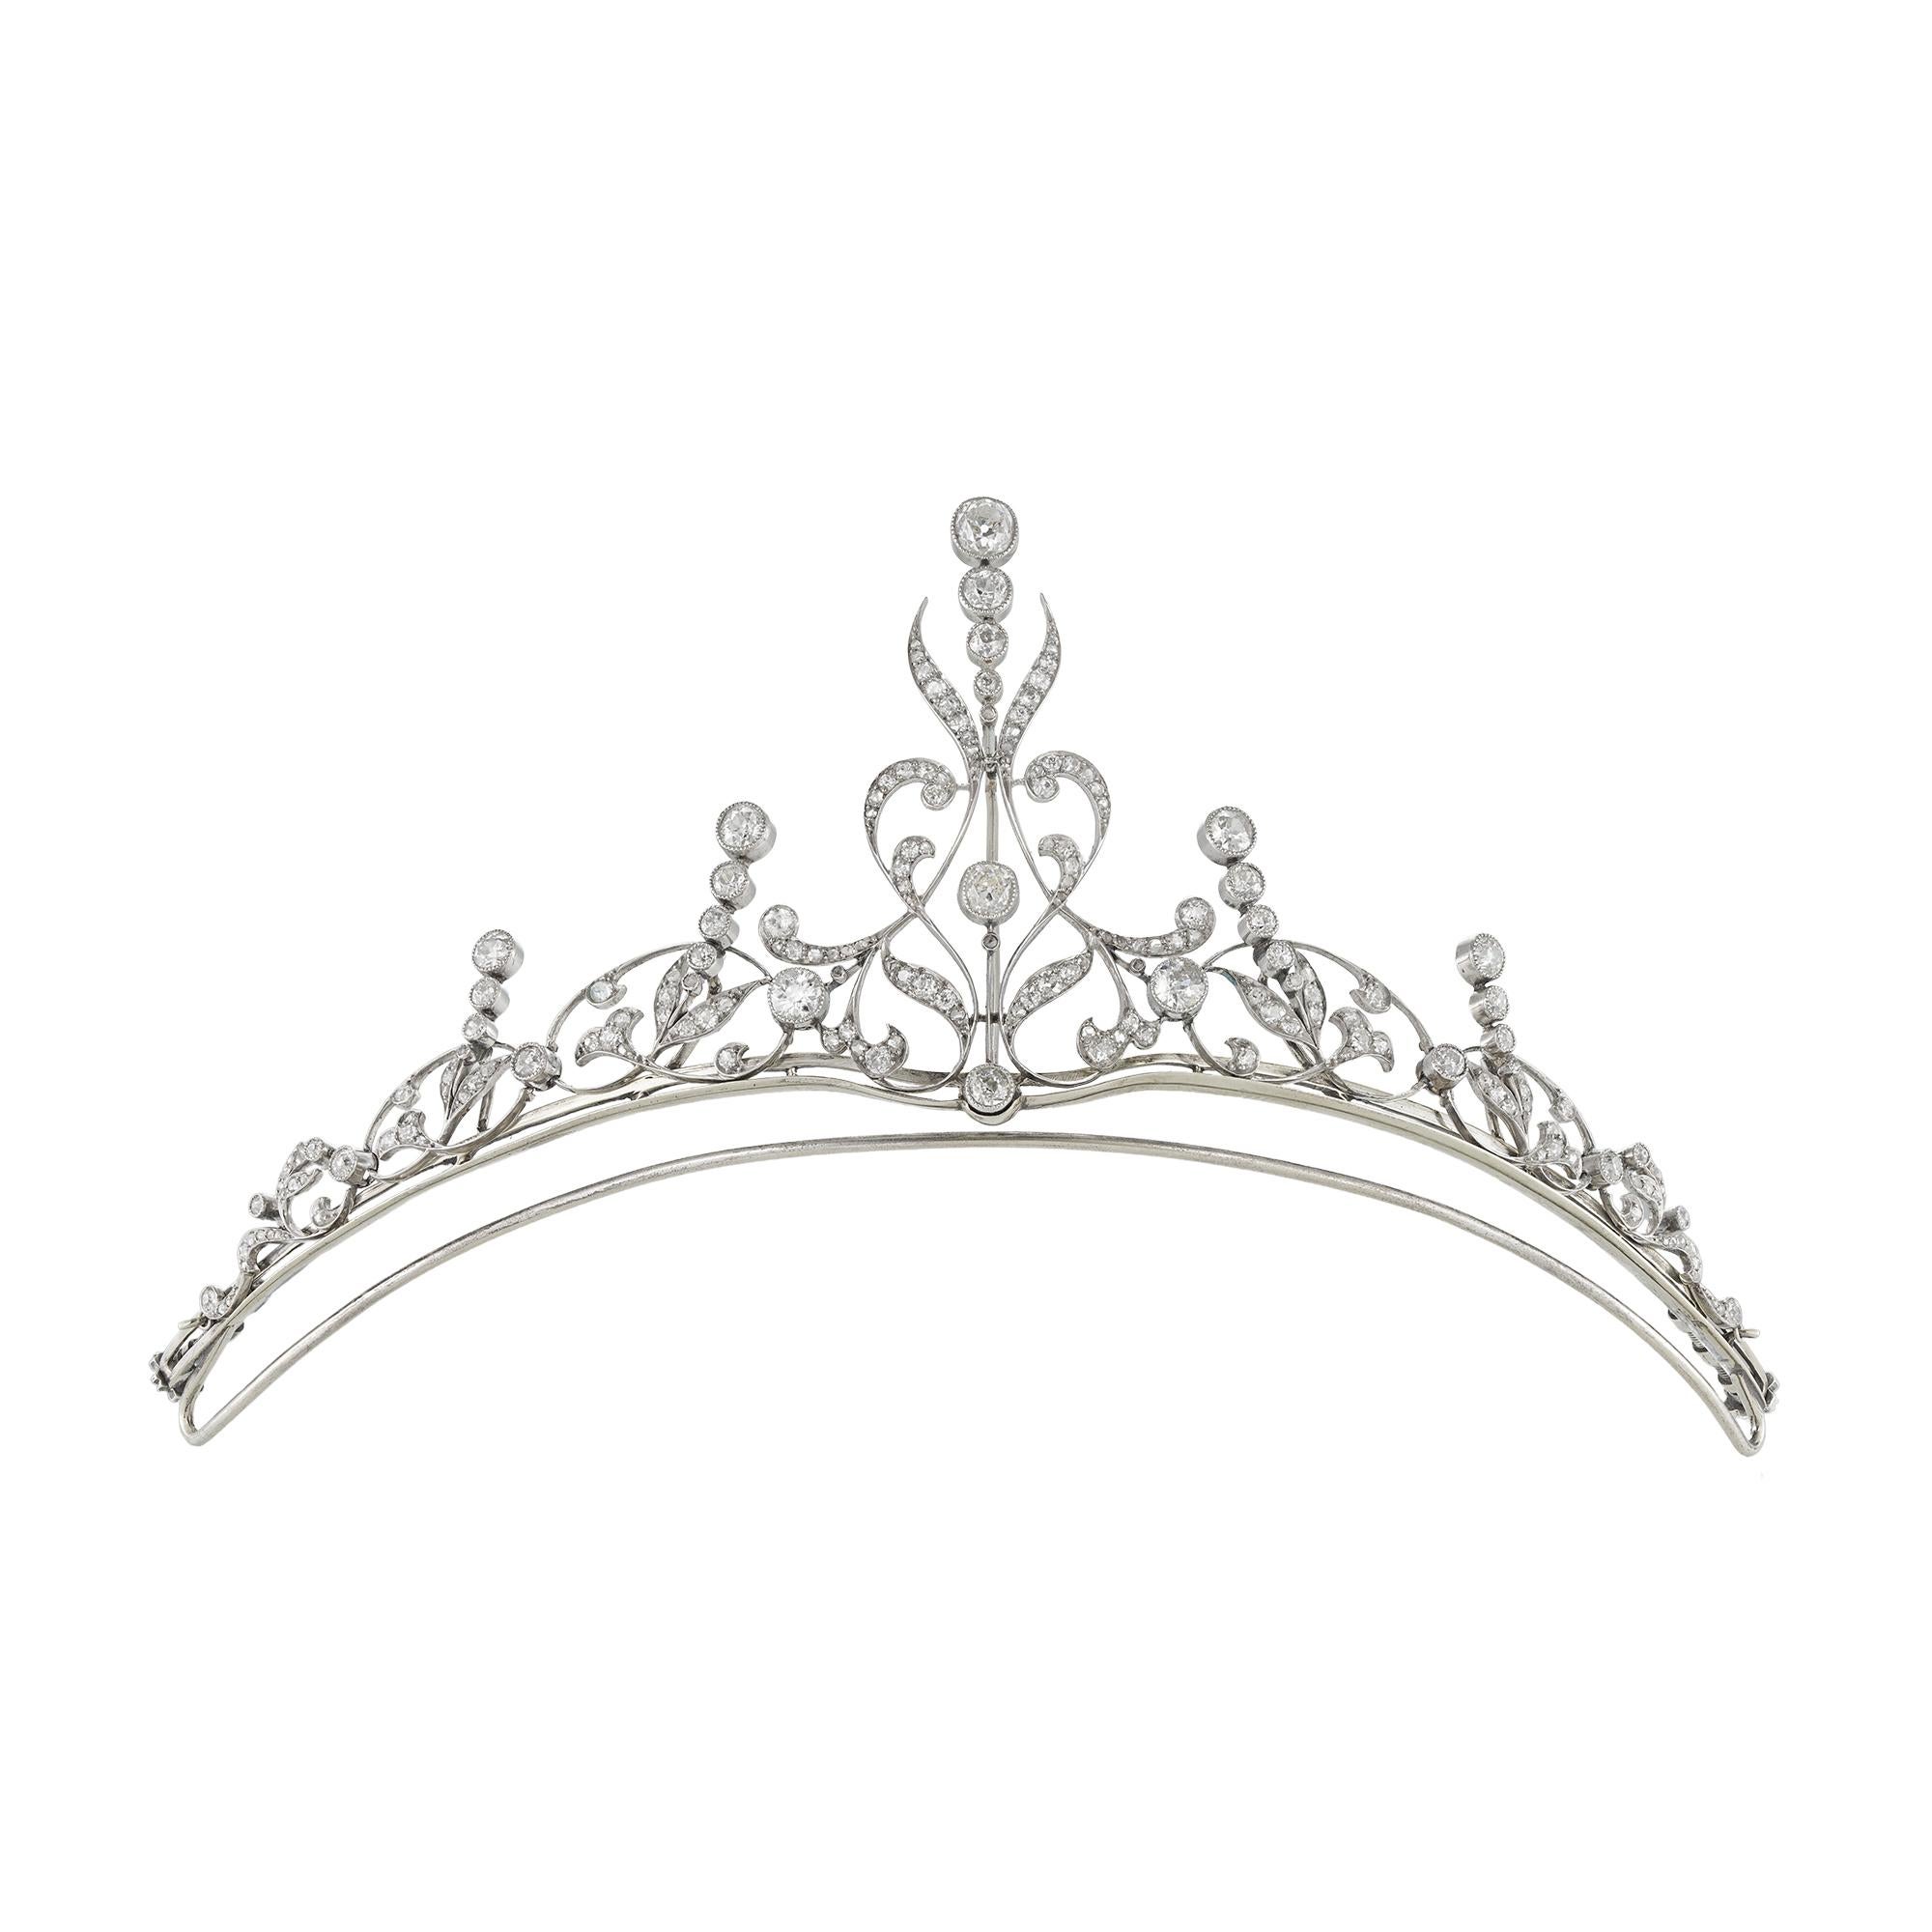 An early 20th century diamond-set tiara/necklace by Skinner & Co, the five principal old-cut diamonds estimated to weigh a combined total of 2 carats, each rub over millegrain-set to a scroll and foliate design embellished with small rose and old